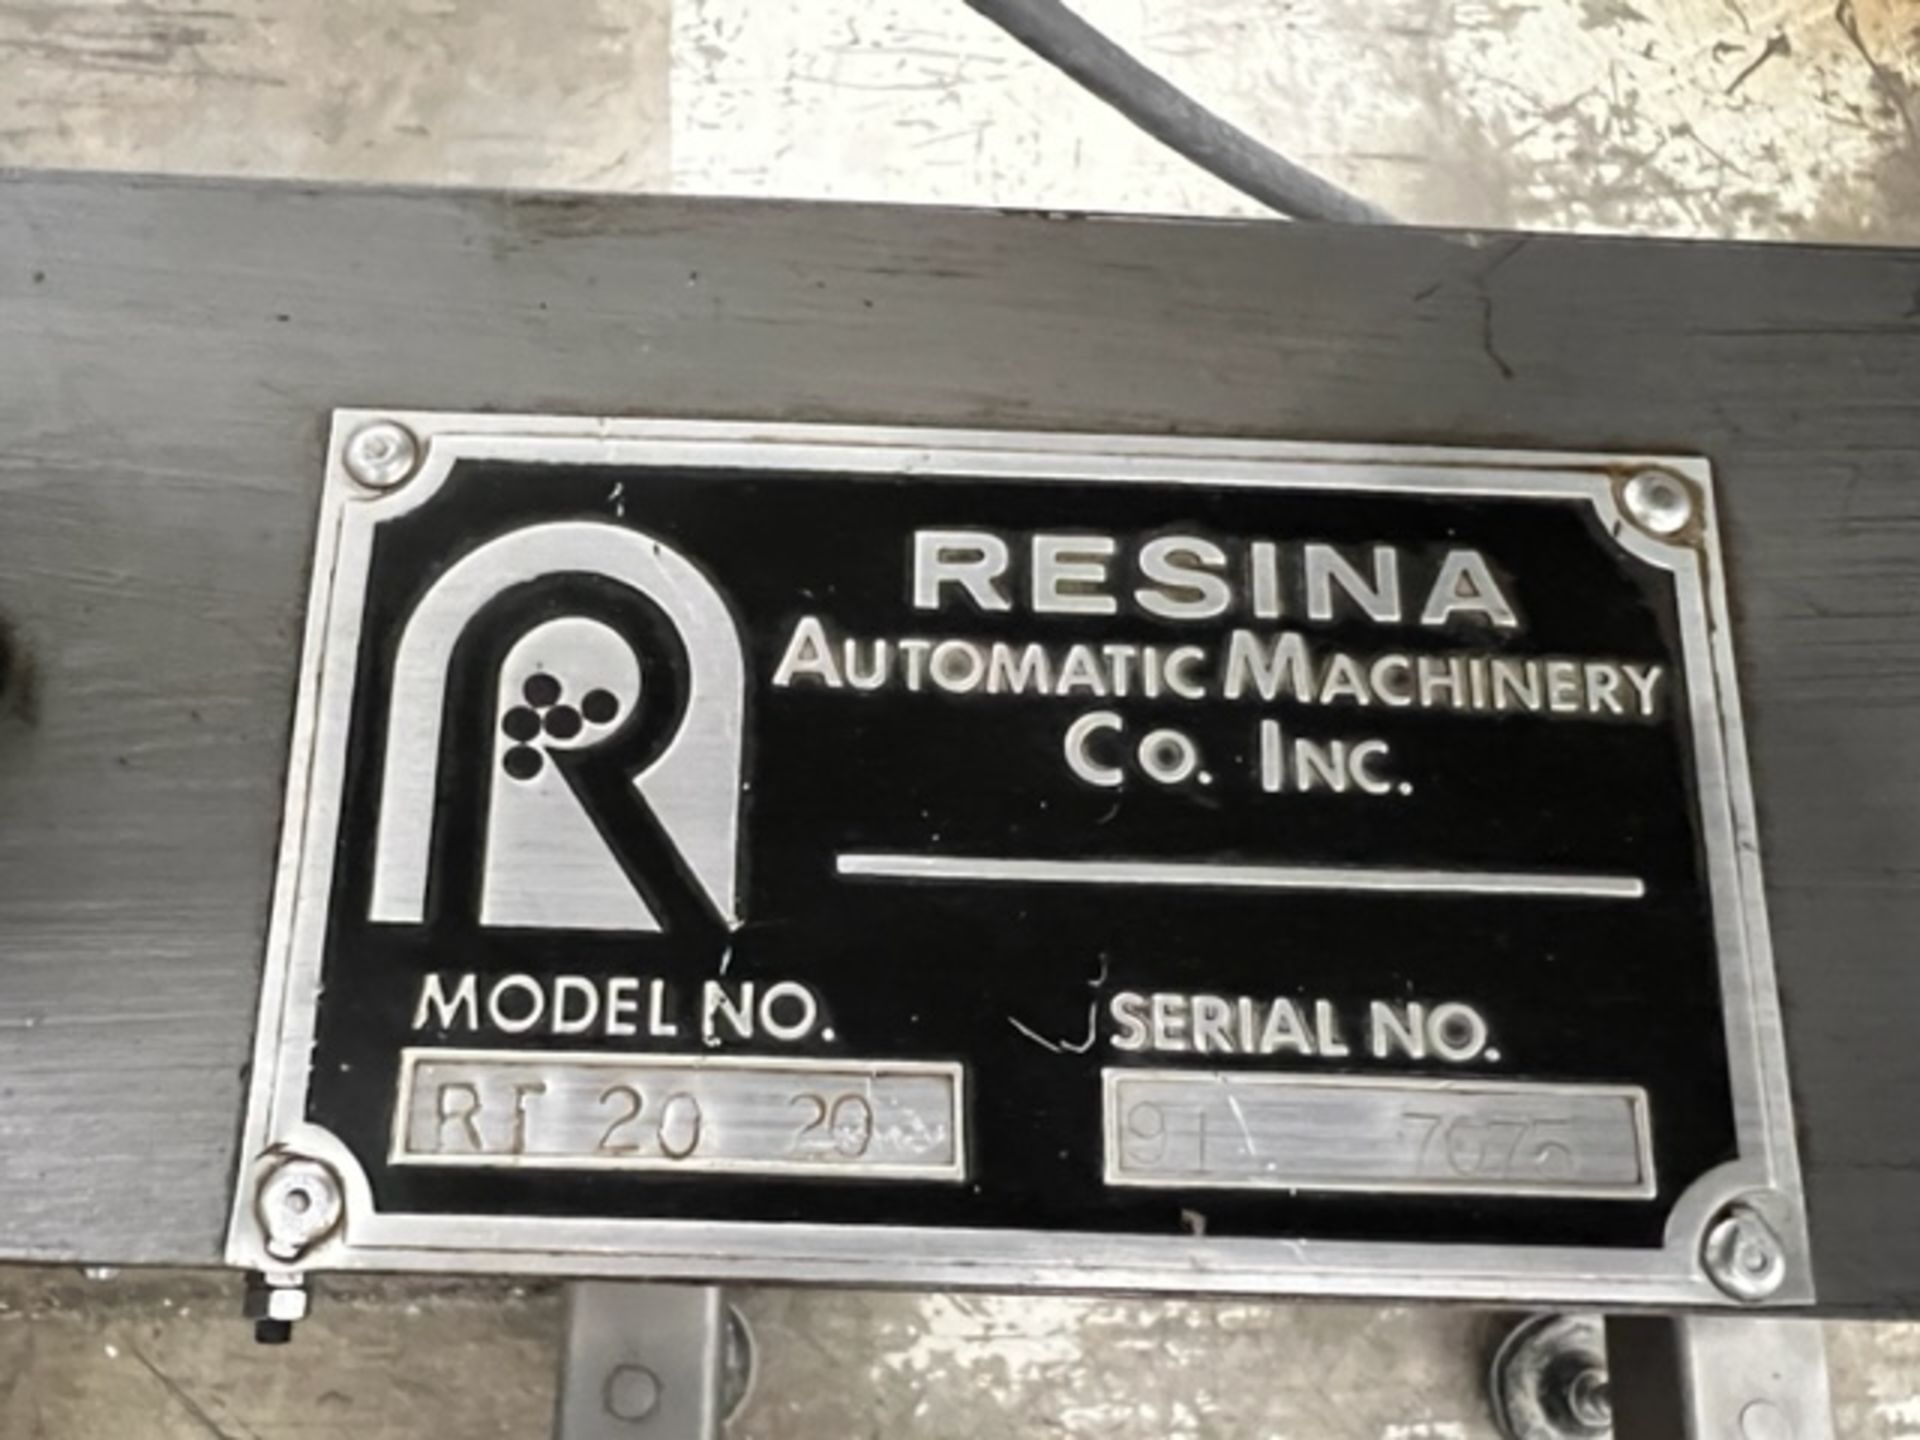 Asset 303 - Resina model RT20 inline Retorquer, serial#917075 with two sets of quills and side - Image 6 of 6